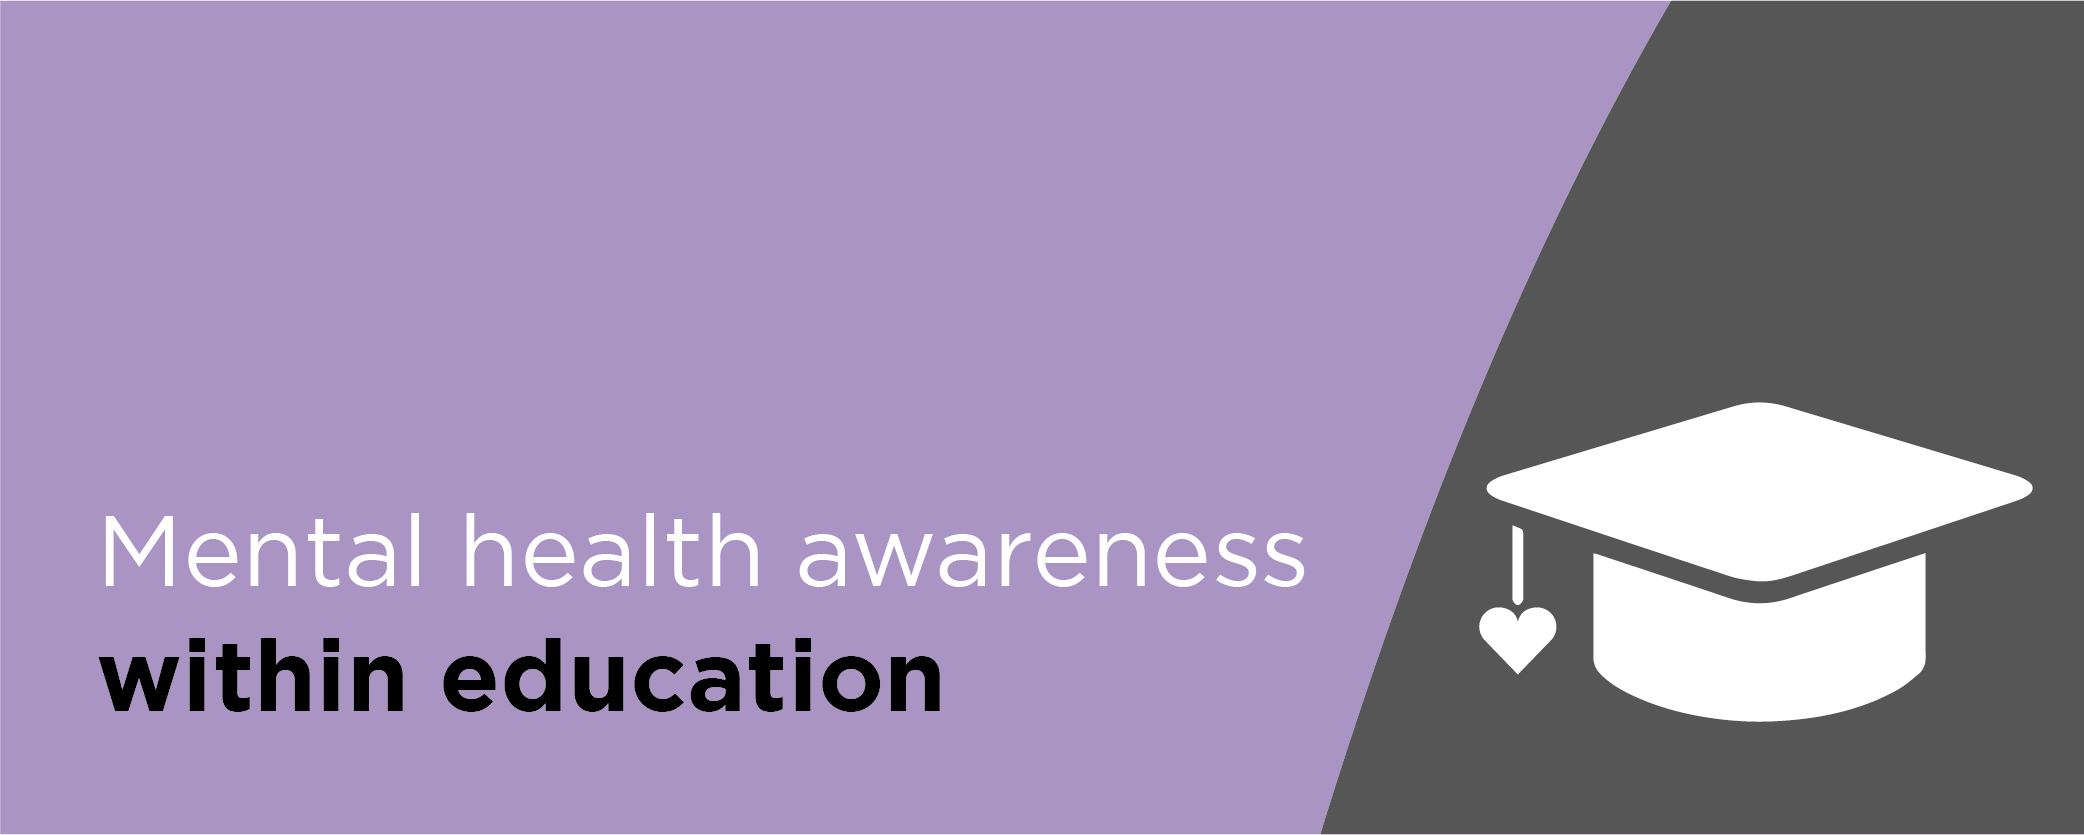 Mental health awareness within education